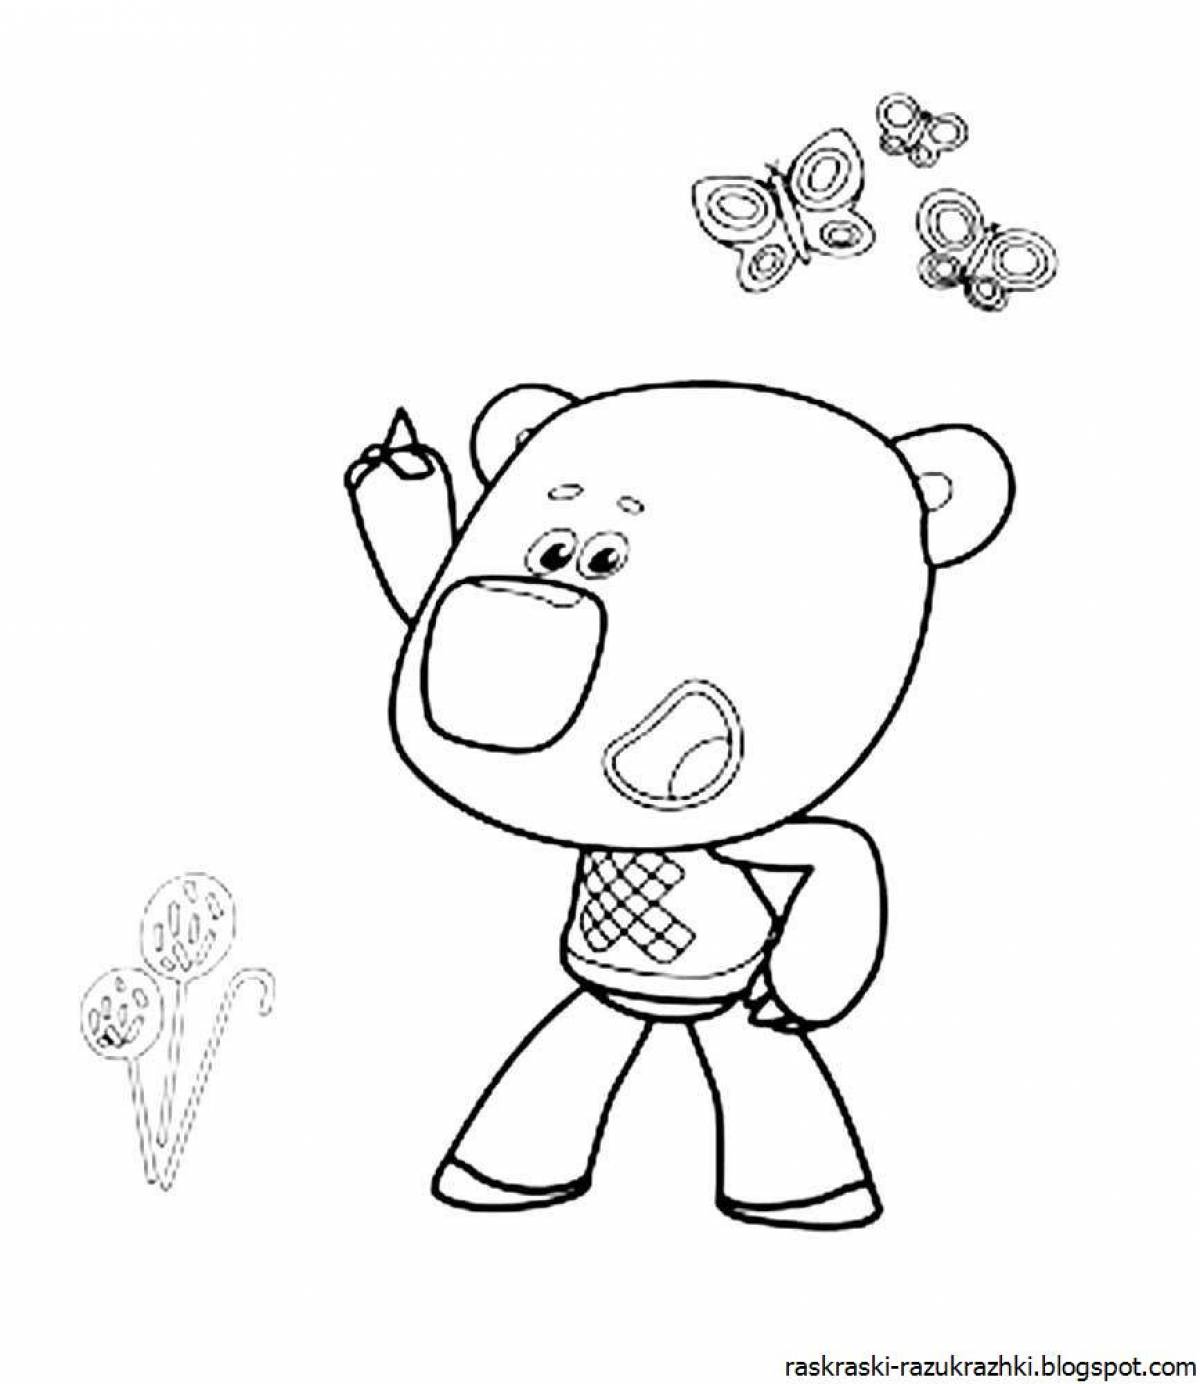 Radiant coloring page good quality memes